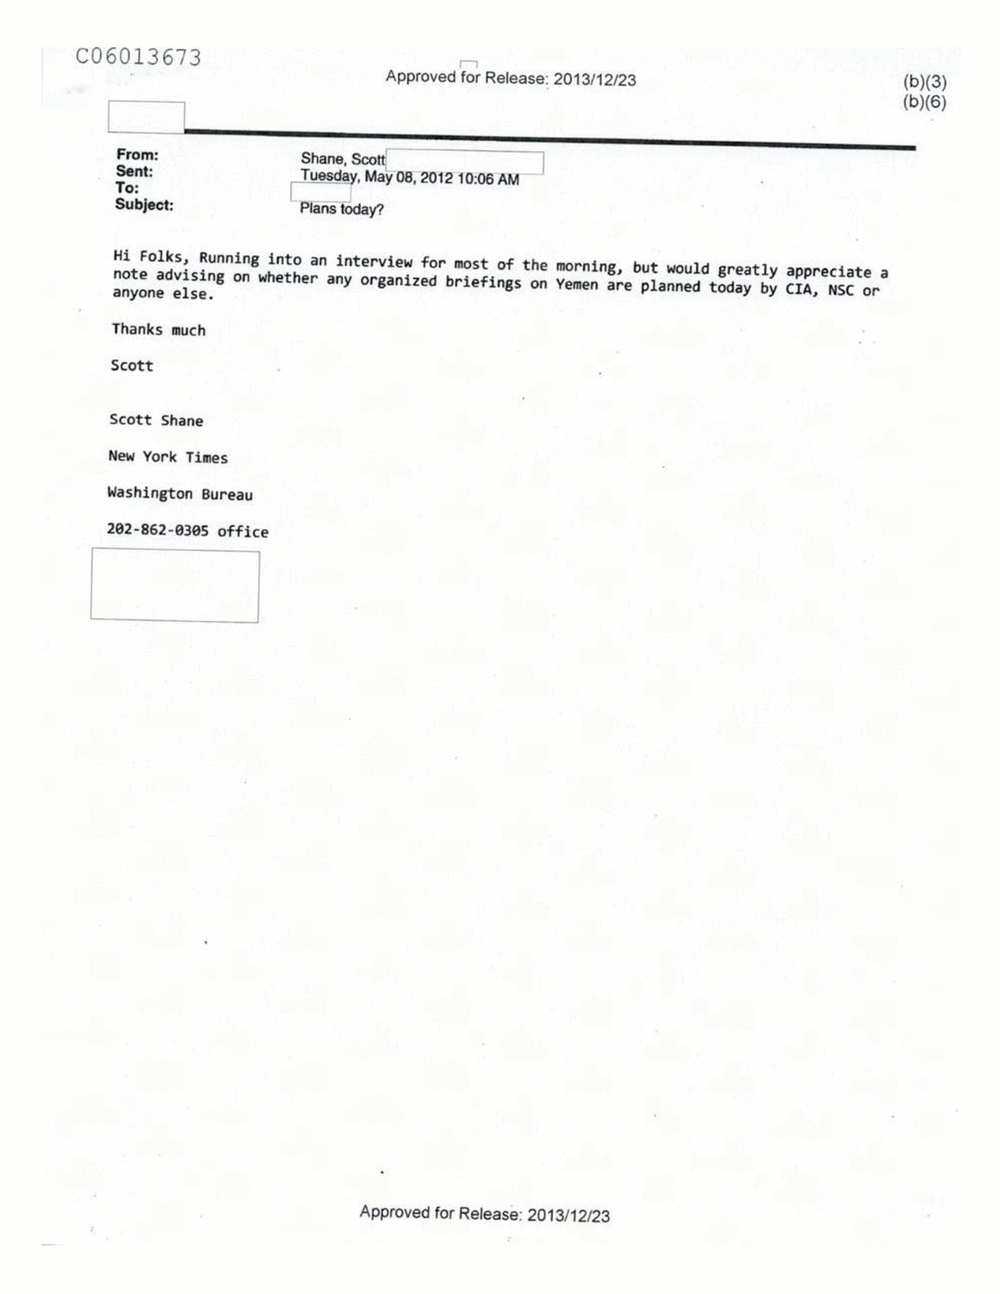 Page 525 from Email Correspondence Between Reporters and CIA Flacks